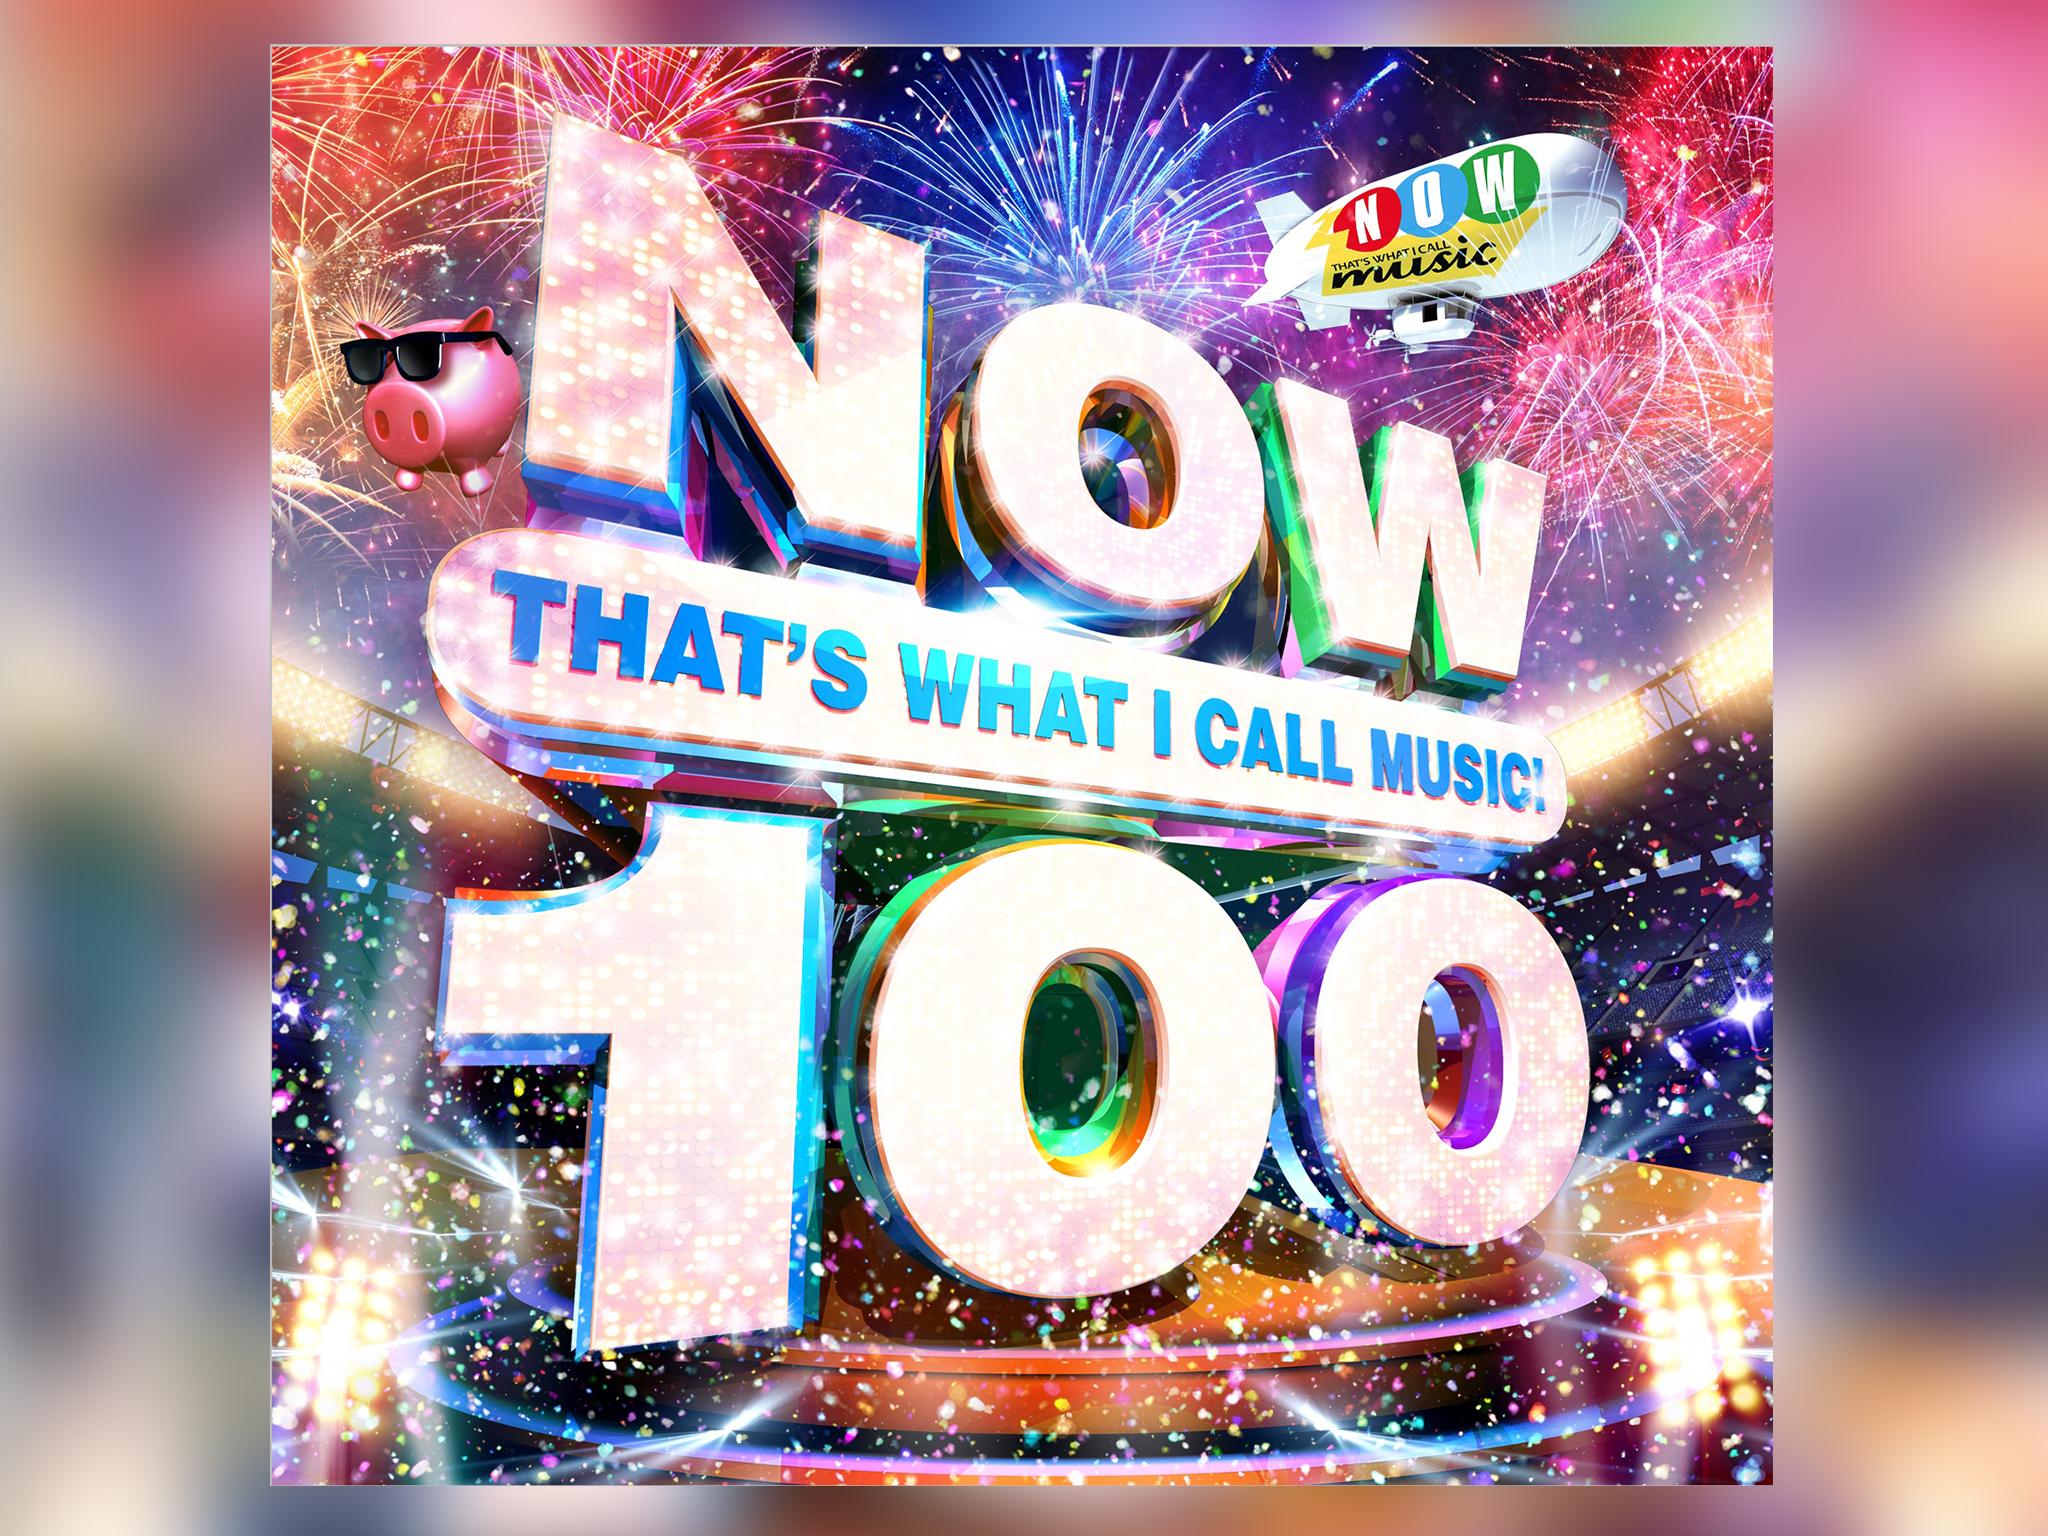 Cover art for the Now 100 album